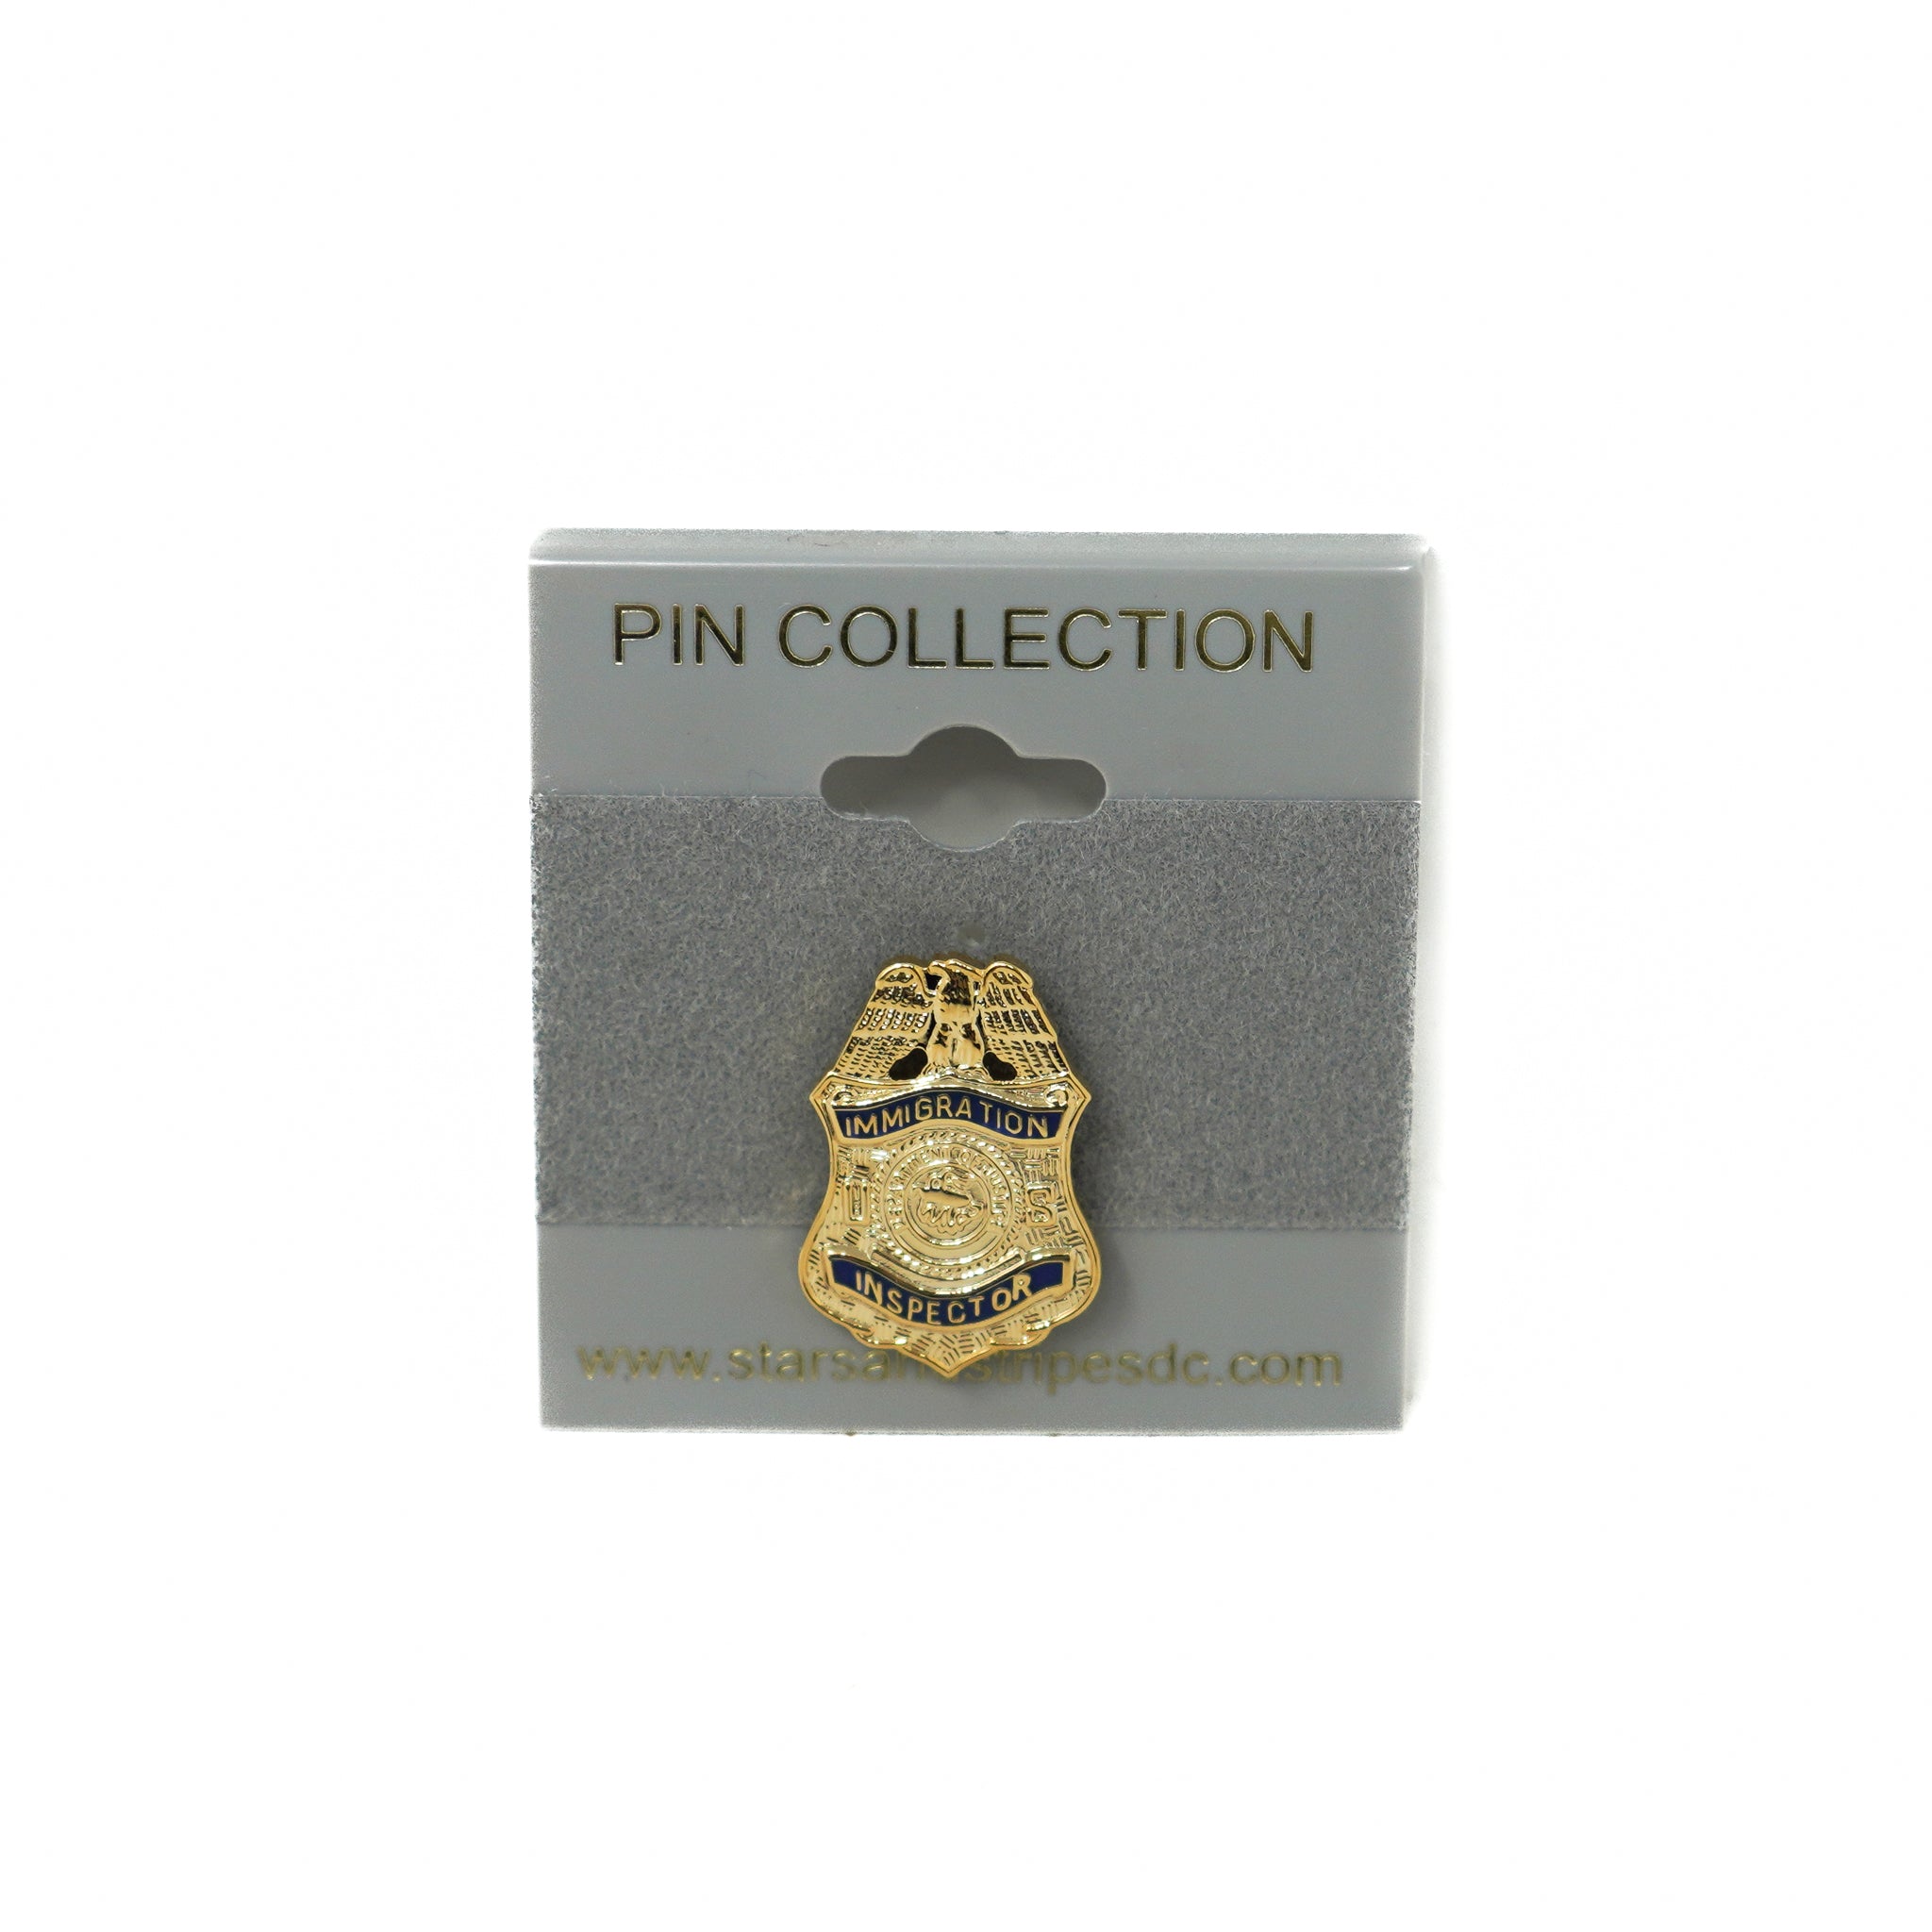 Department of Justice Immigration Inspector Lapel Pin